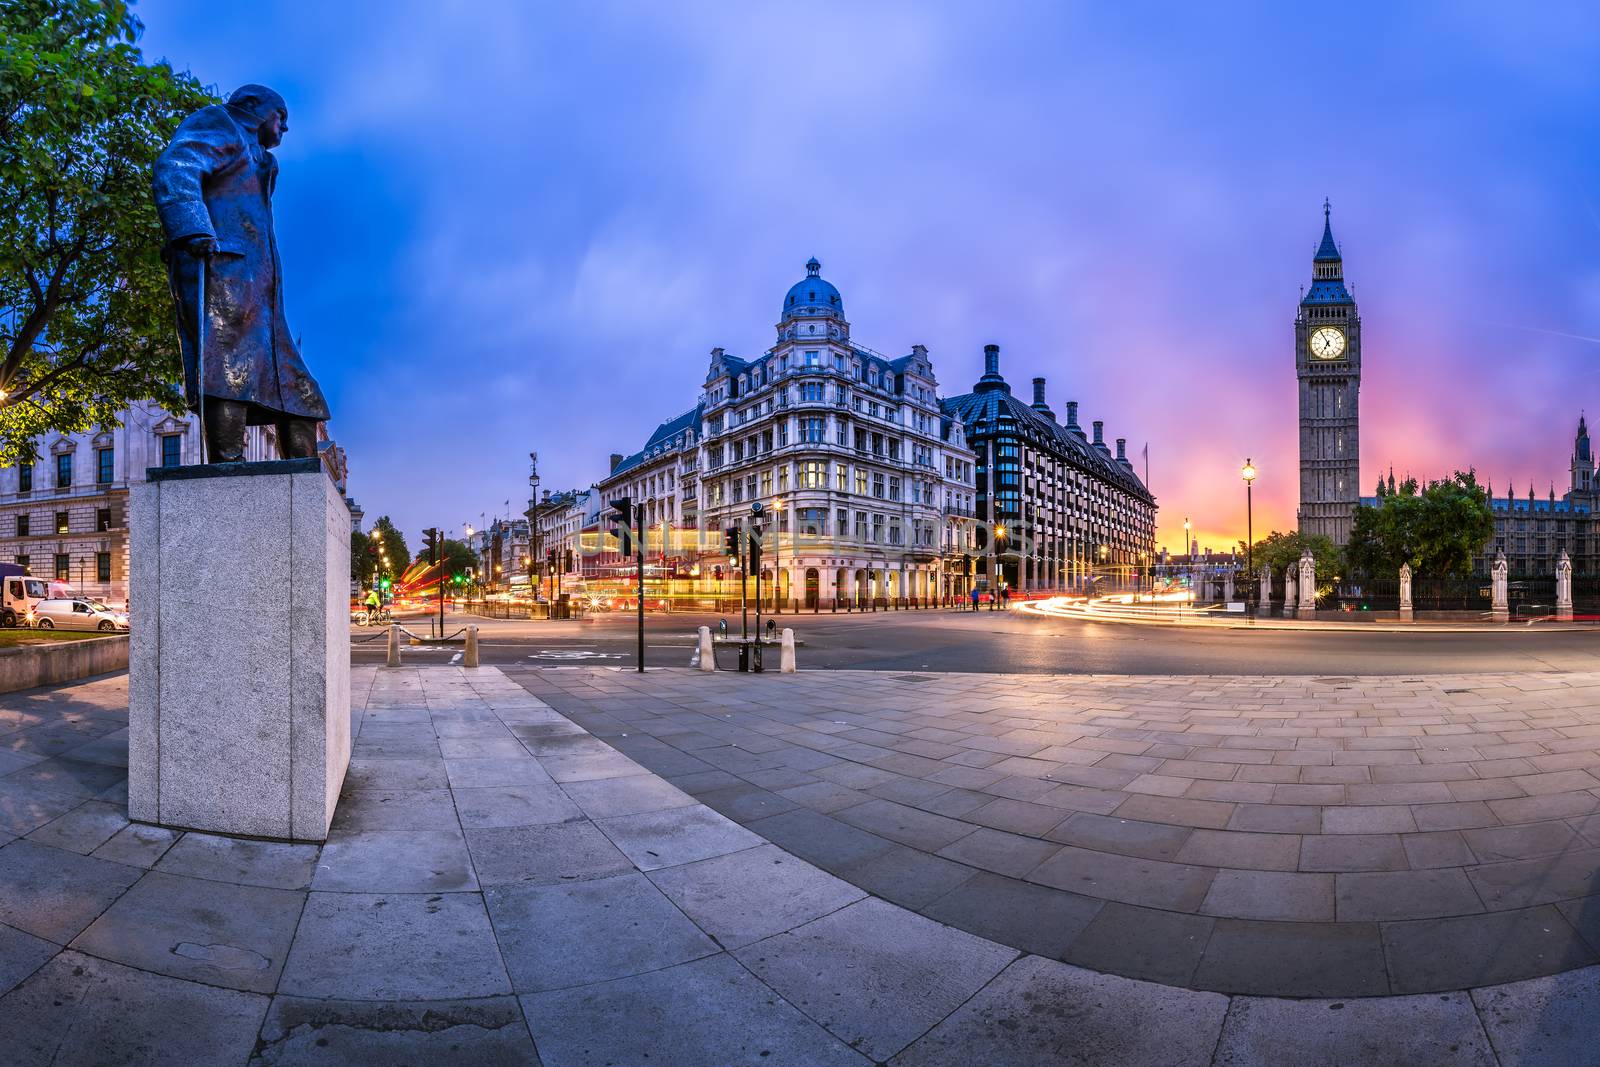 Panorama of Parliament Square and Queen Elizabeth Tower in Londo by anshar